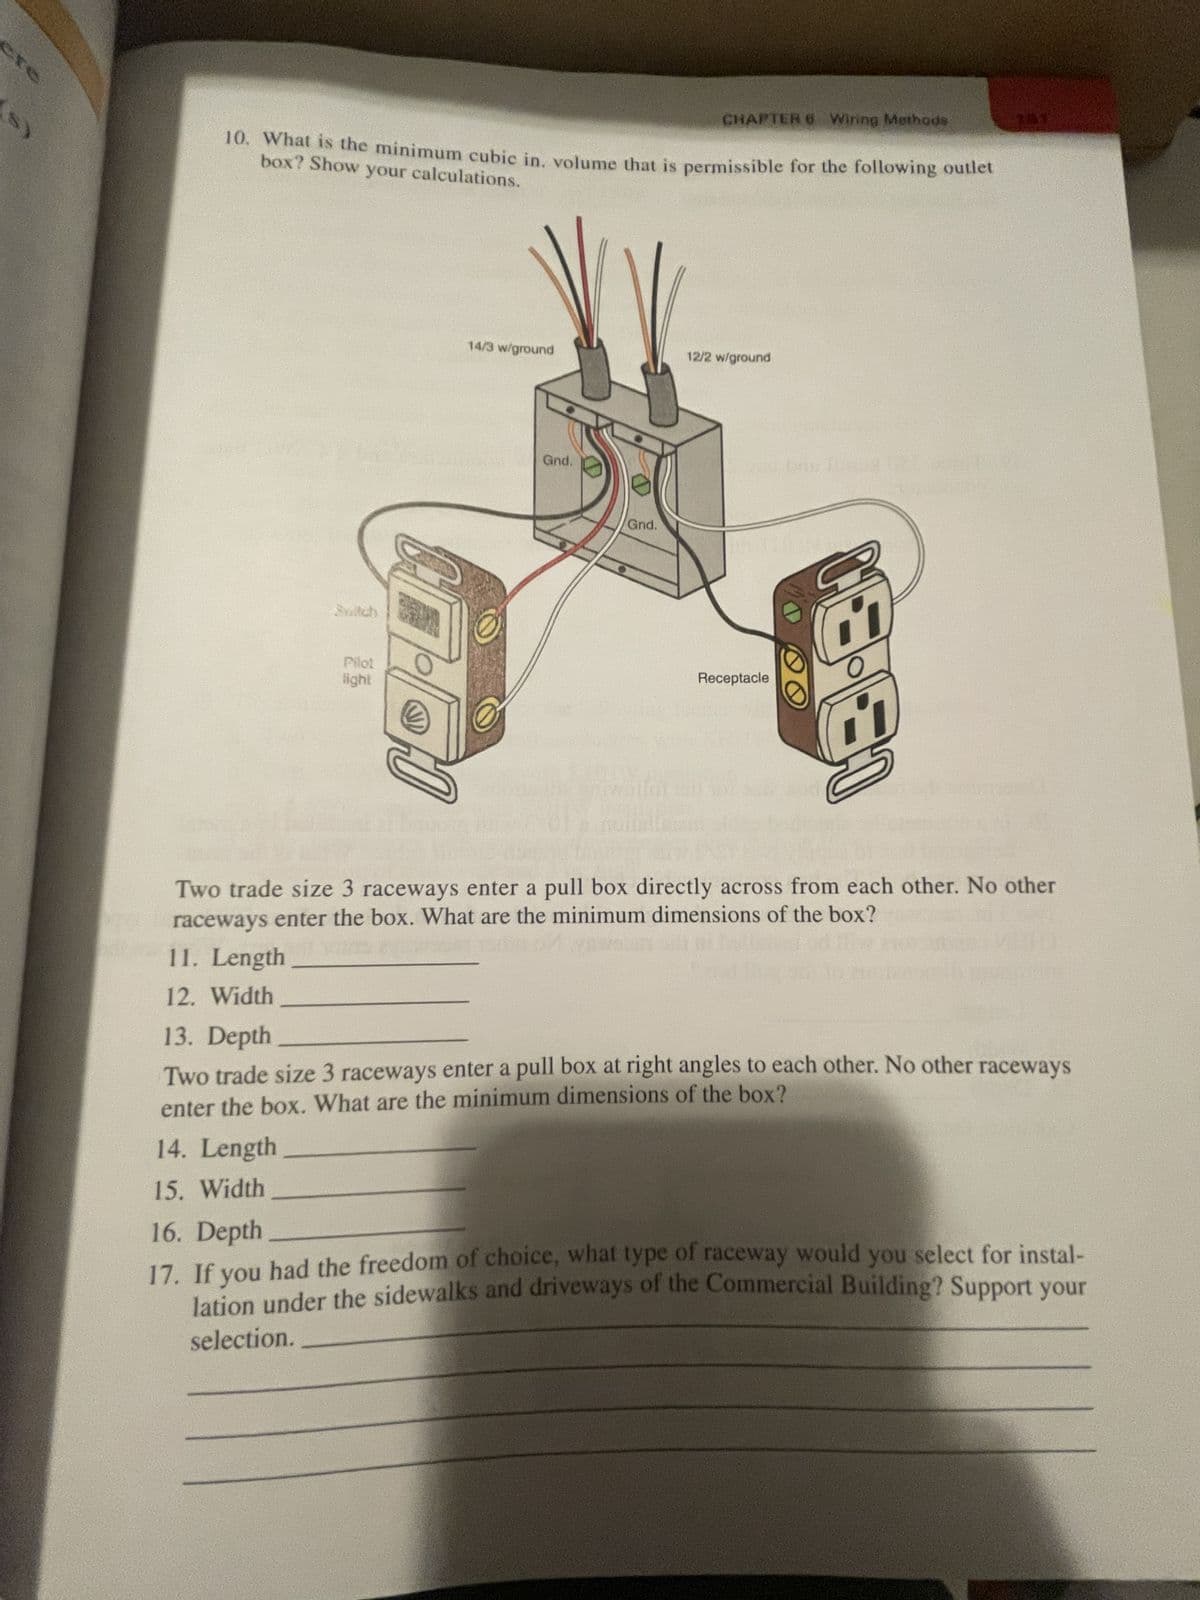 10. What is the minimum cubic in, volume that is permissible for the following outlet
box? Show your calculations.
Suitch
11. Length
12. Width
Pilot
light
CT
14/3 w/ground
Gnd.
CHAPTER 6 Wiring Methods
Gnd.
12/2 w/ground
Receptacle
13-131
Two trade size 3 raceways enter a pull box directly across from each other. No other
raceways enter the box. What are the minimum dimensions of the box?
13. Depth
Two trade size 3 raceways enter a pull box at right angles to each other. No other raceways
enter the box. What are the minimum dimensions of the box?
14. Length
15. Width
16. Depth
17. If you had the freedom of choice, what type of raceway would you select for instal-
lation under the sidewalks and driveways of the Commercial Building? Support your
selection.